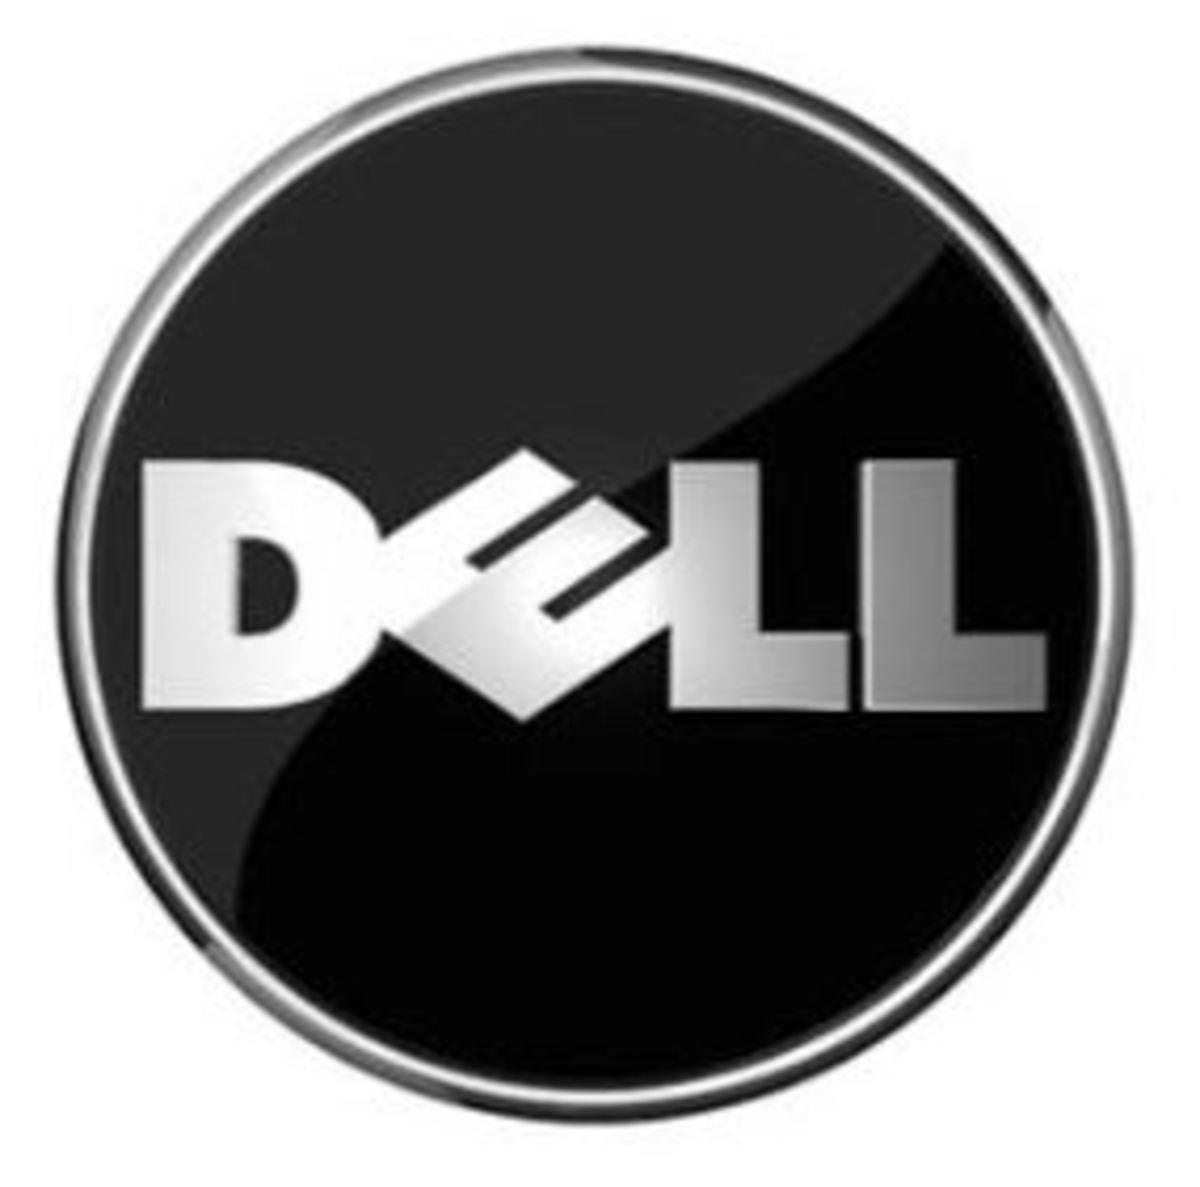 Cites Logo - Dell Cites Study Showing PC Share Growth